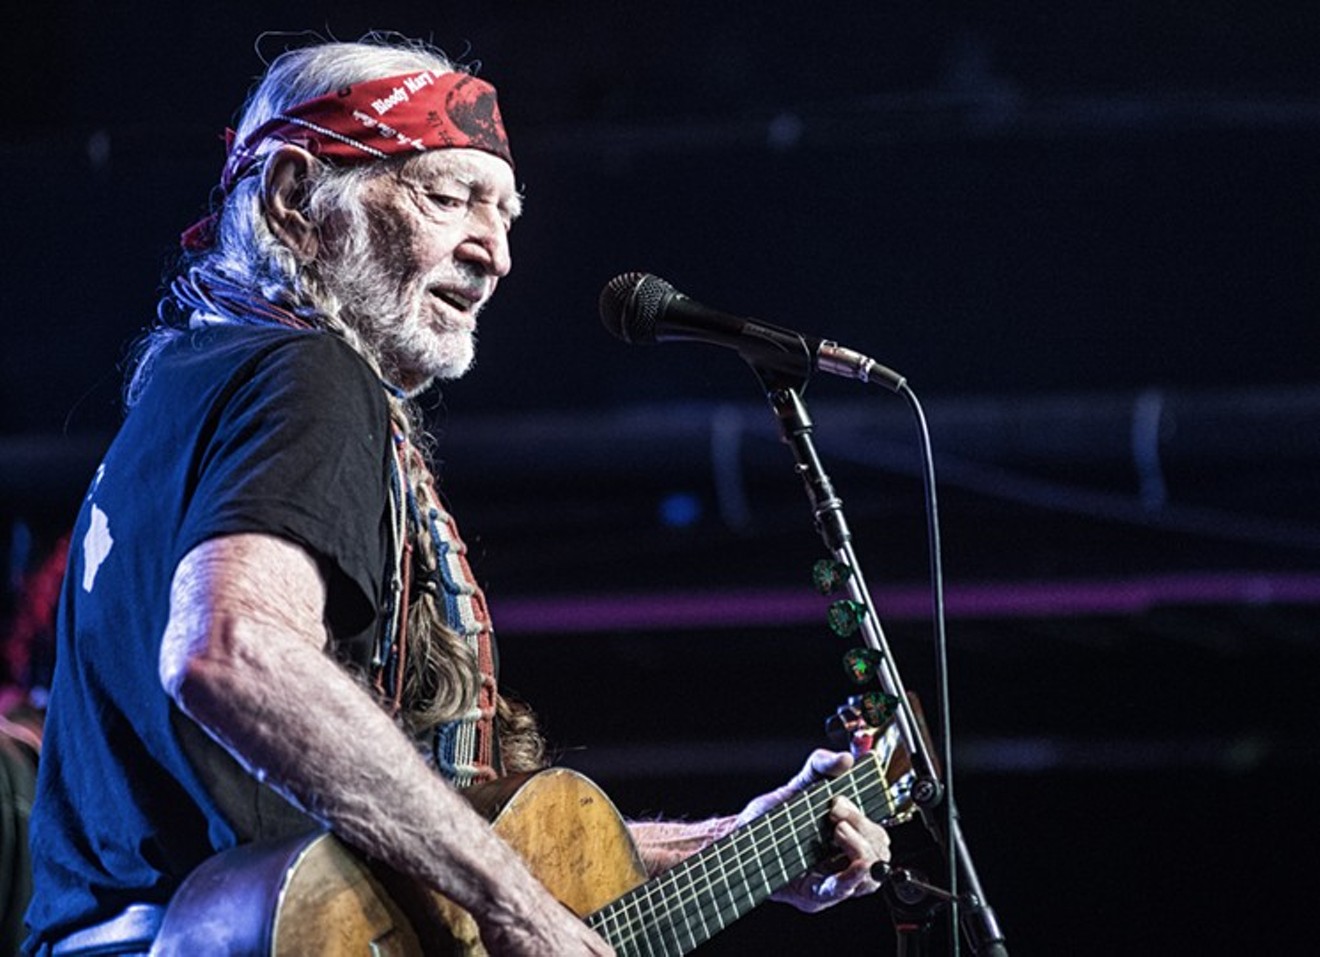 Willie Nelson made the list, of course. But which song did we pick?